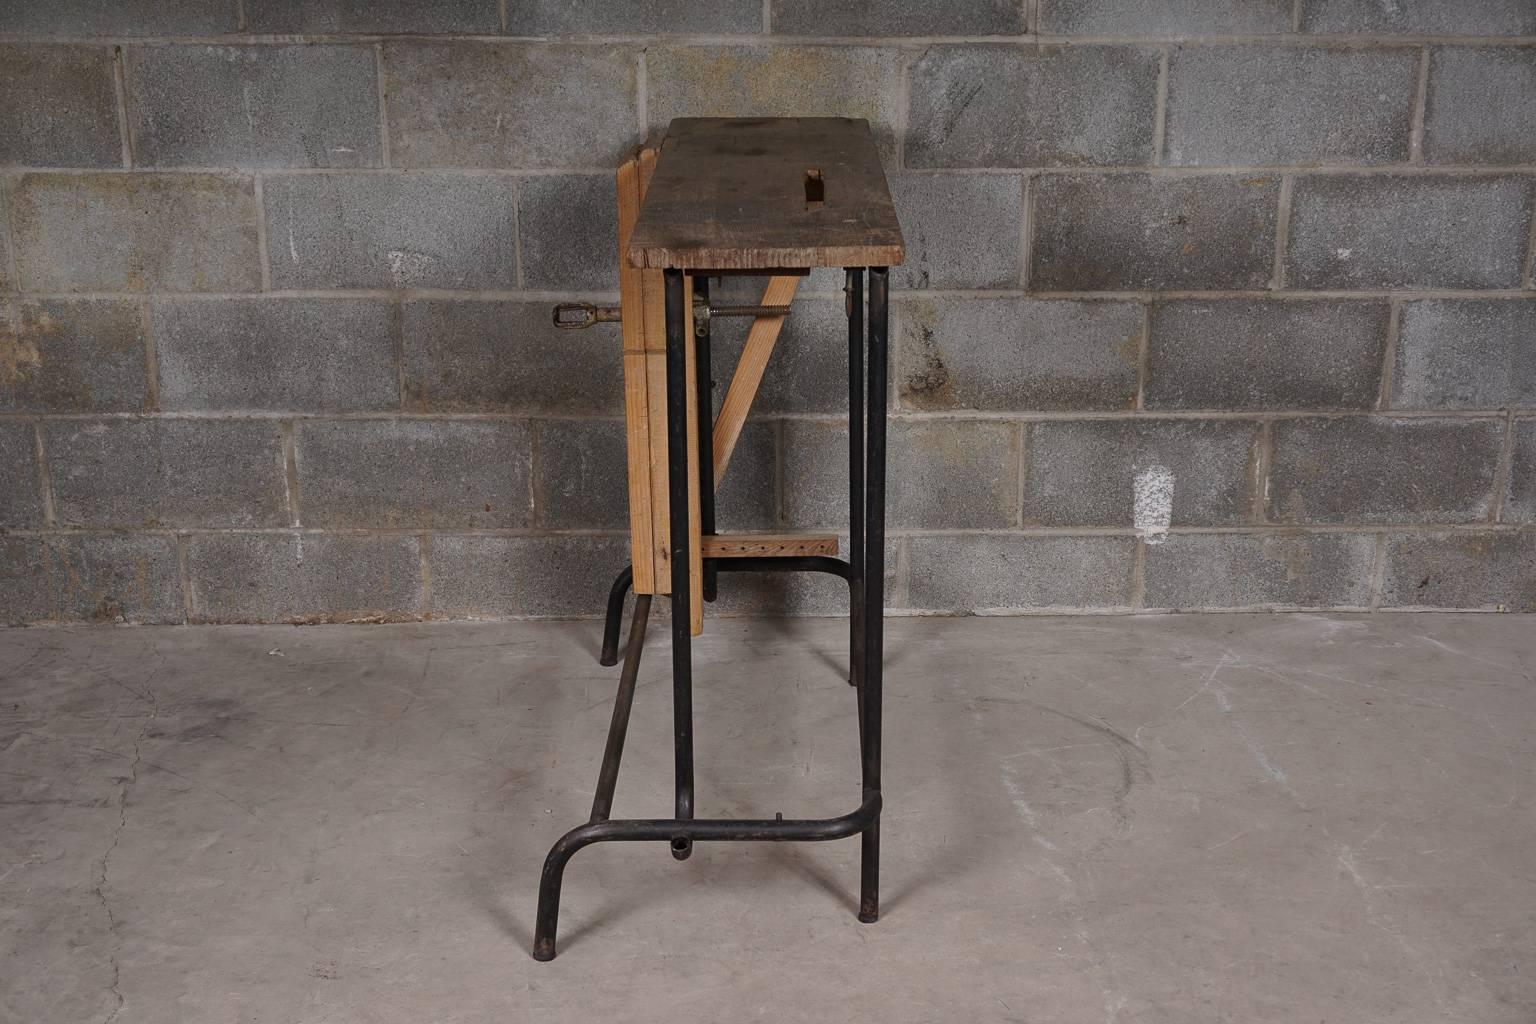 Vintage industrial console table, France, 1940s. Solid oak top with a metal base. Nice wear and patina.